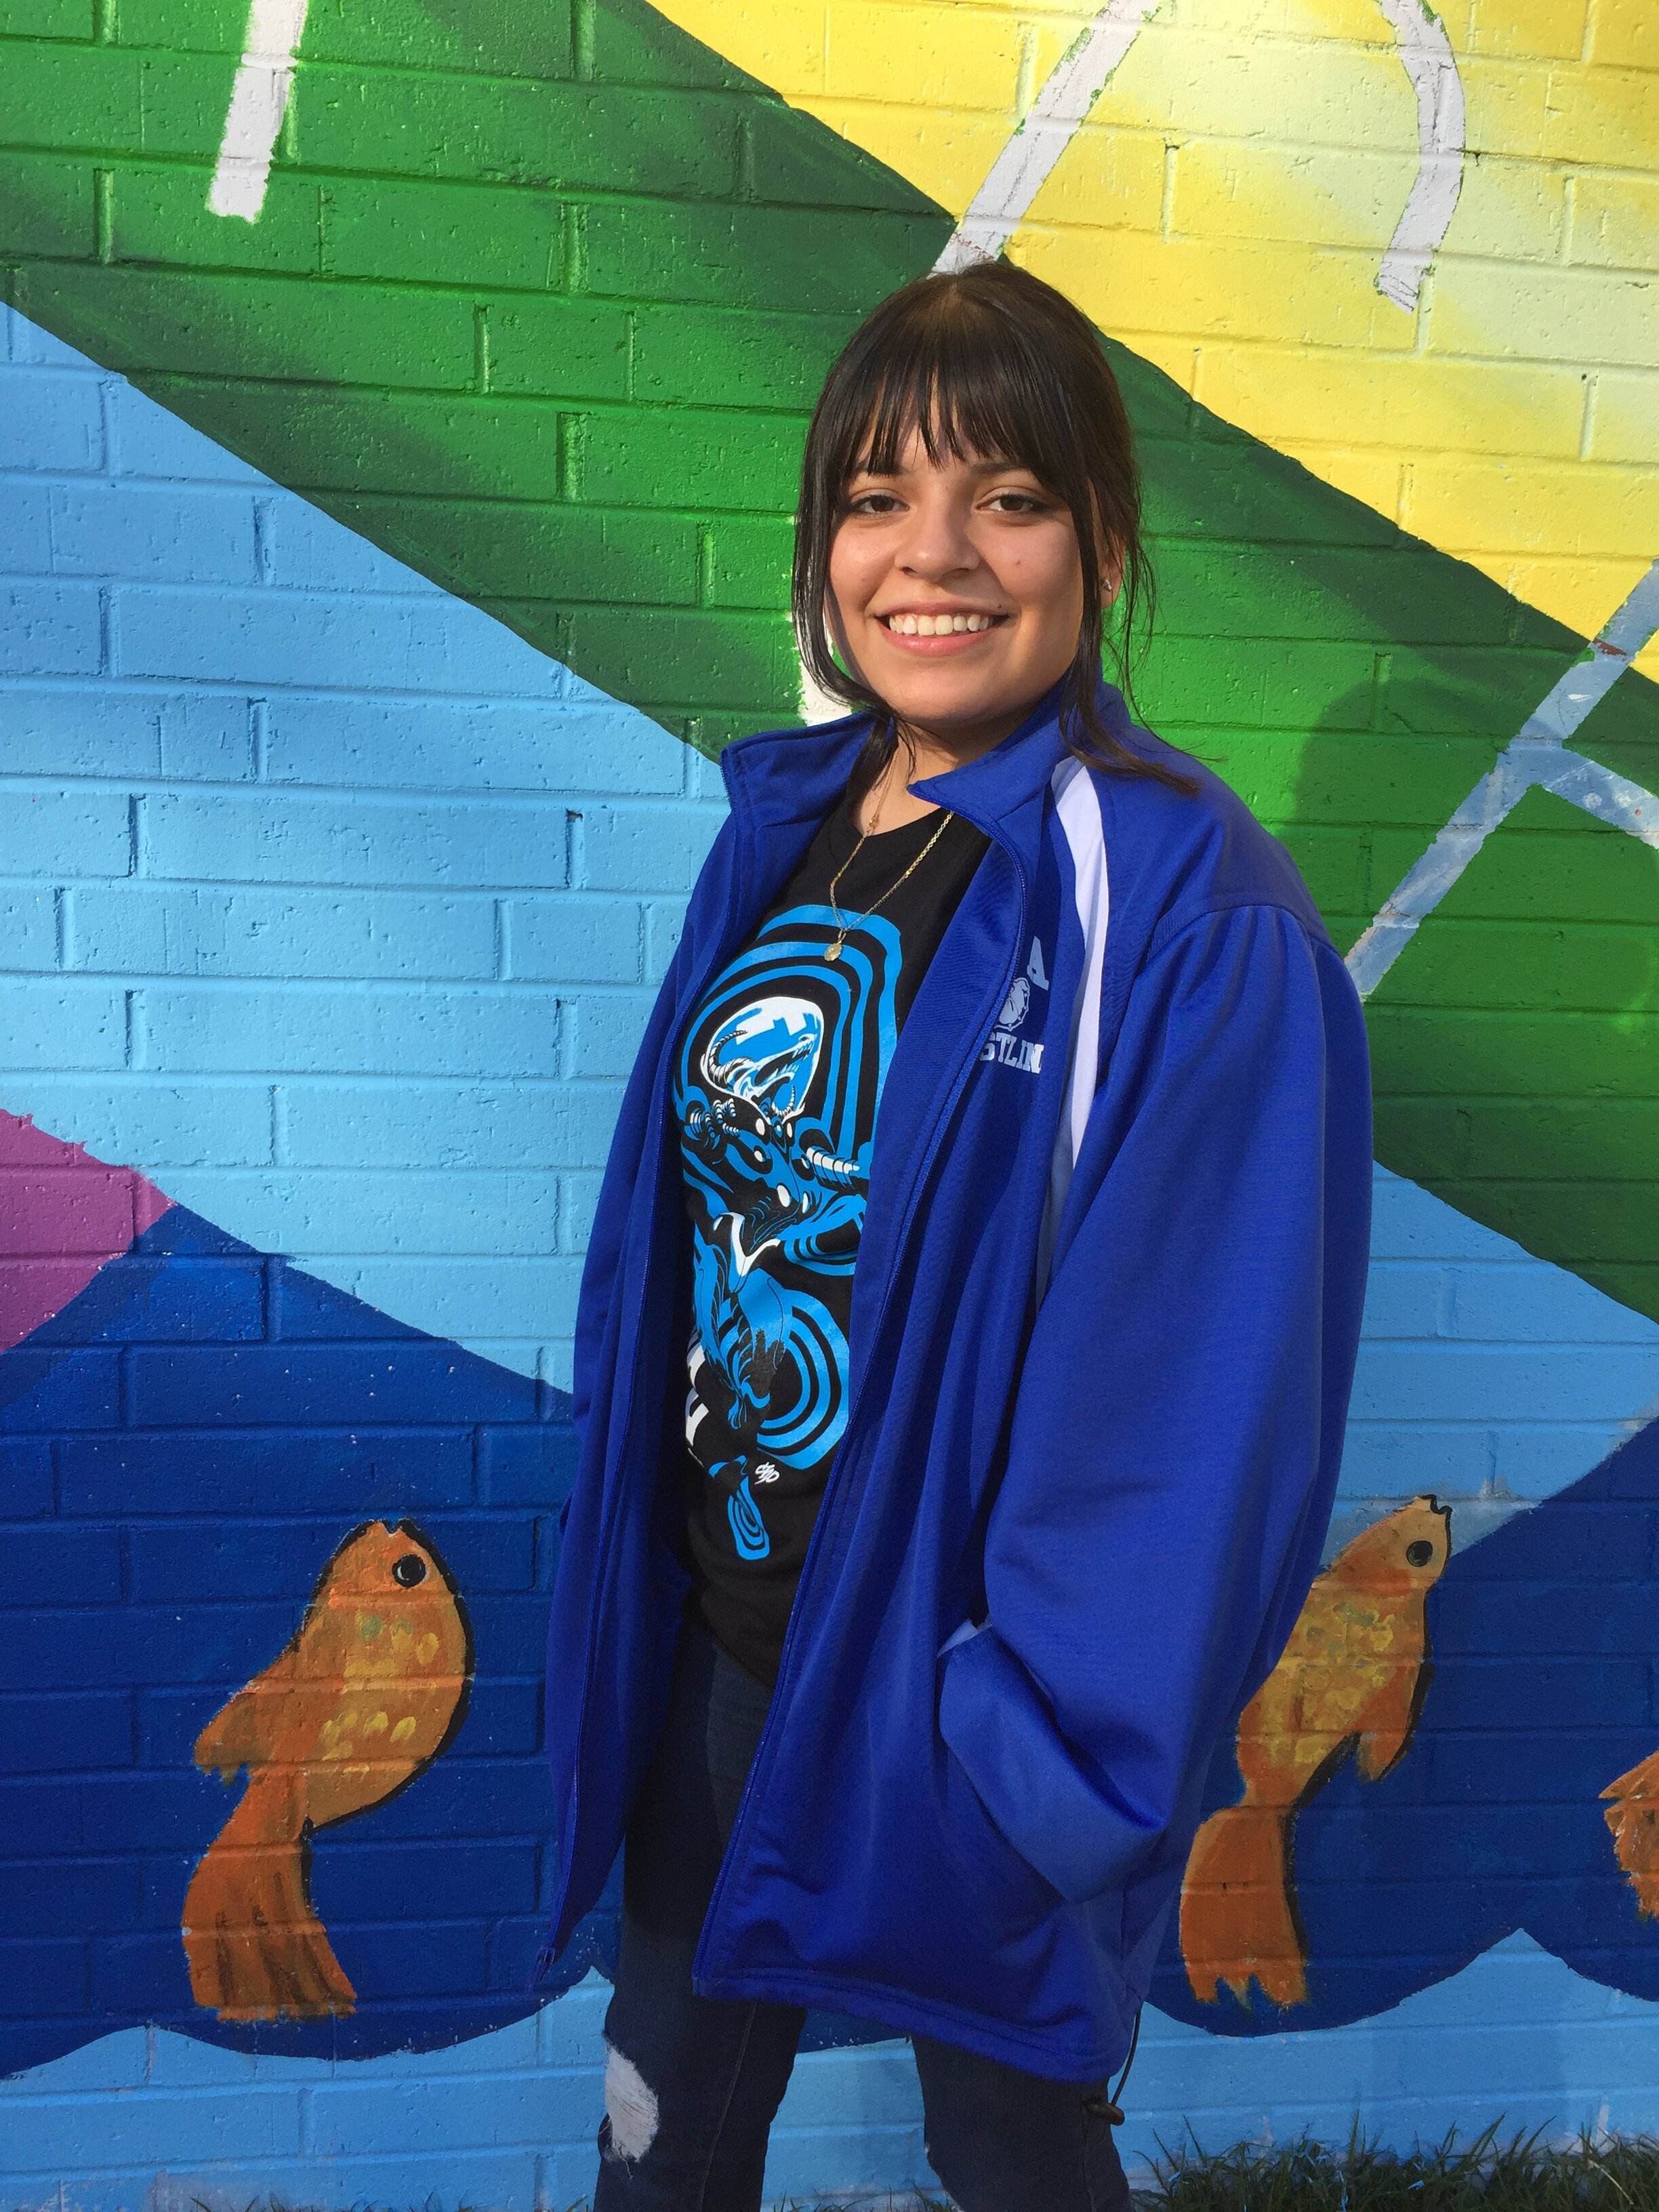  Youth capacity building was achieved on this project as Cornelio recruited local high school artist Estephanie Sanchez to serve as an artist mentee. Estephanie has been central to the team and has gained valuable public art experience.  Photo courte